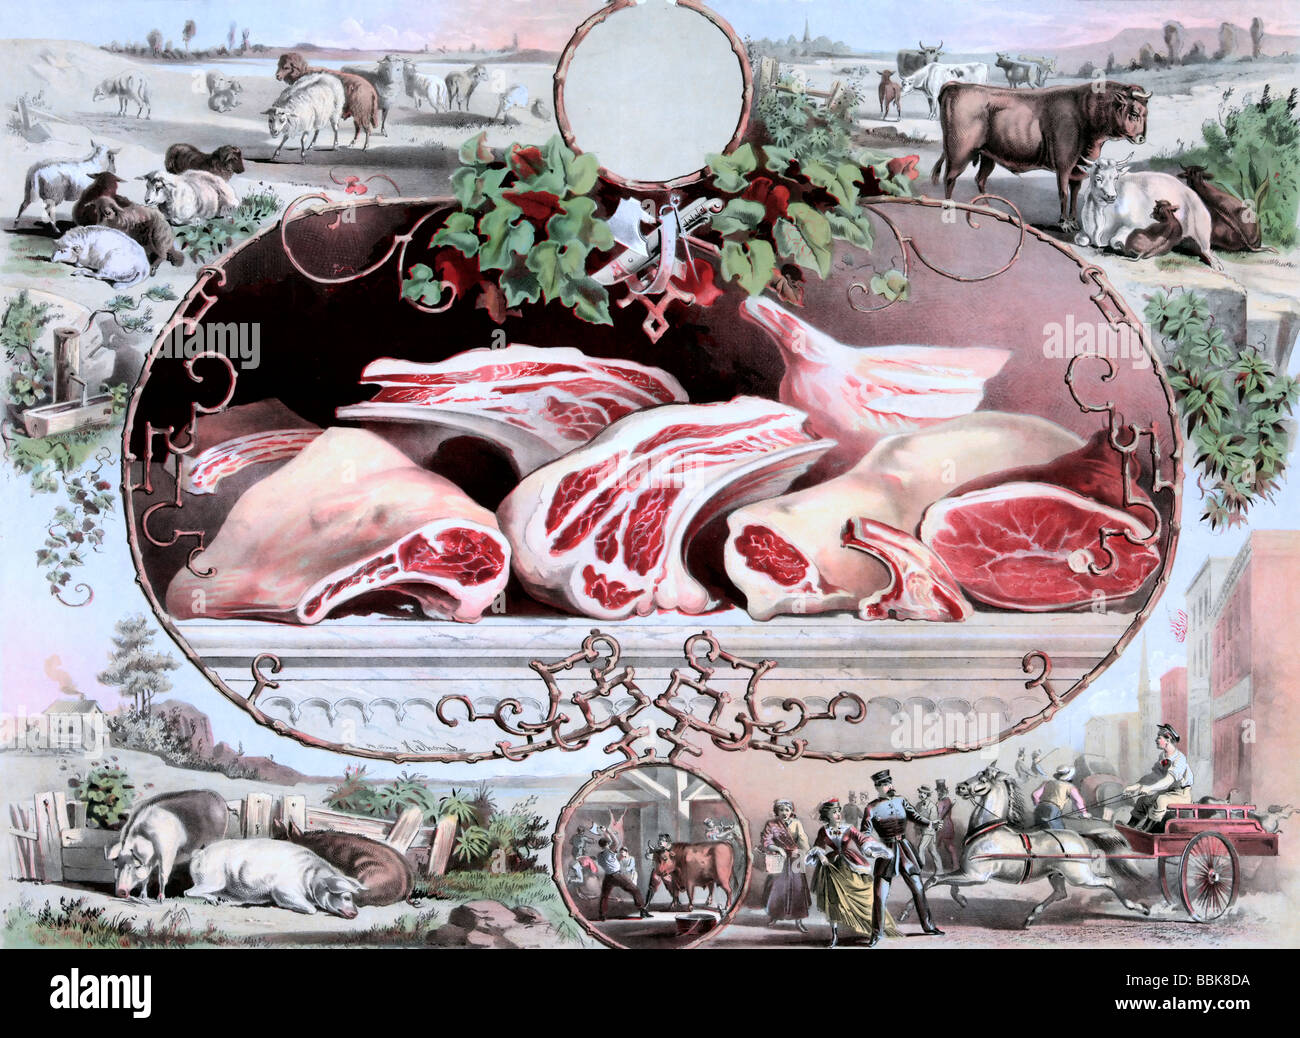 Advertisement showing cuts of meat, sheep, cattle, pigs, animal slaughter, and transportation of dead animals by wagon Stock Photo